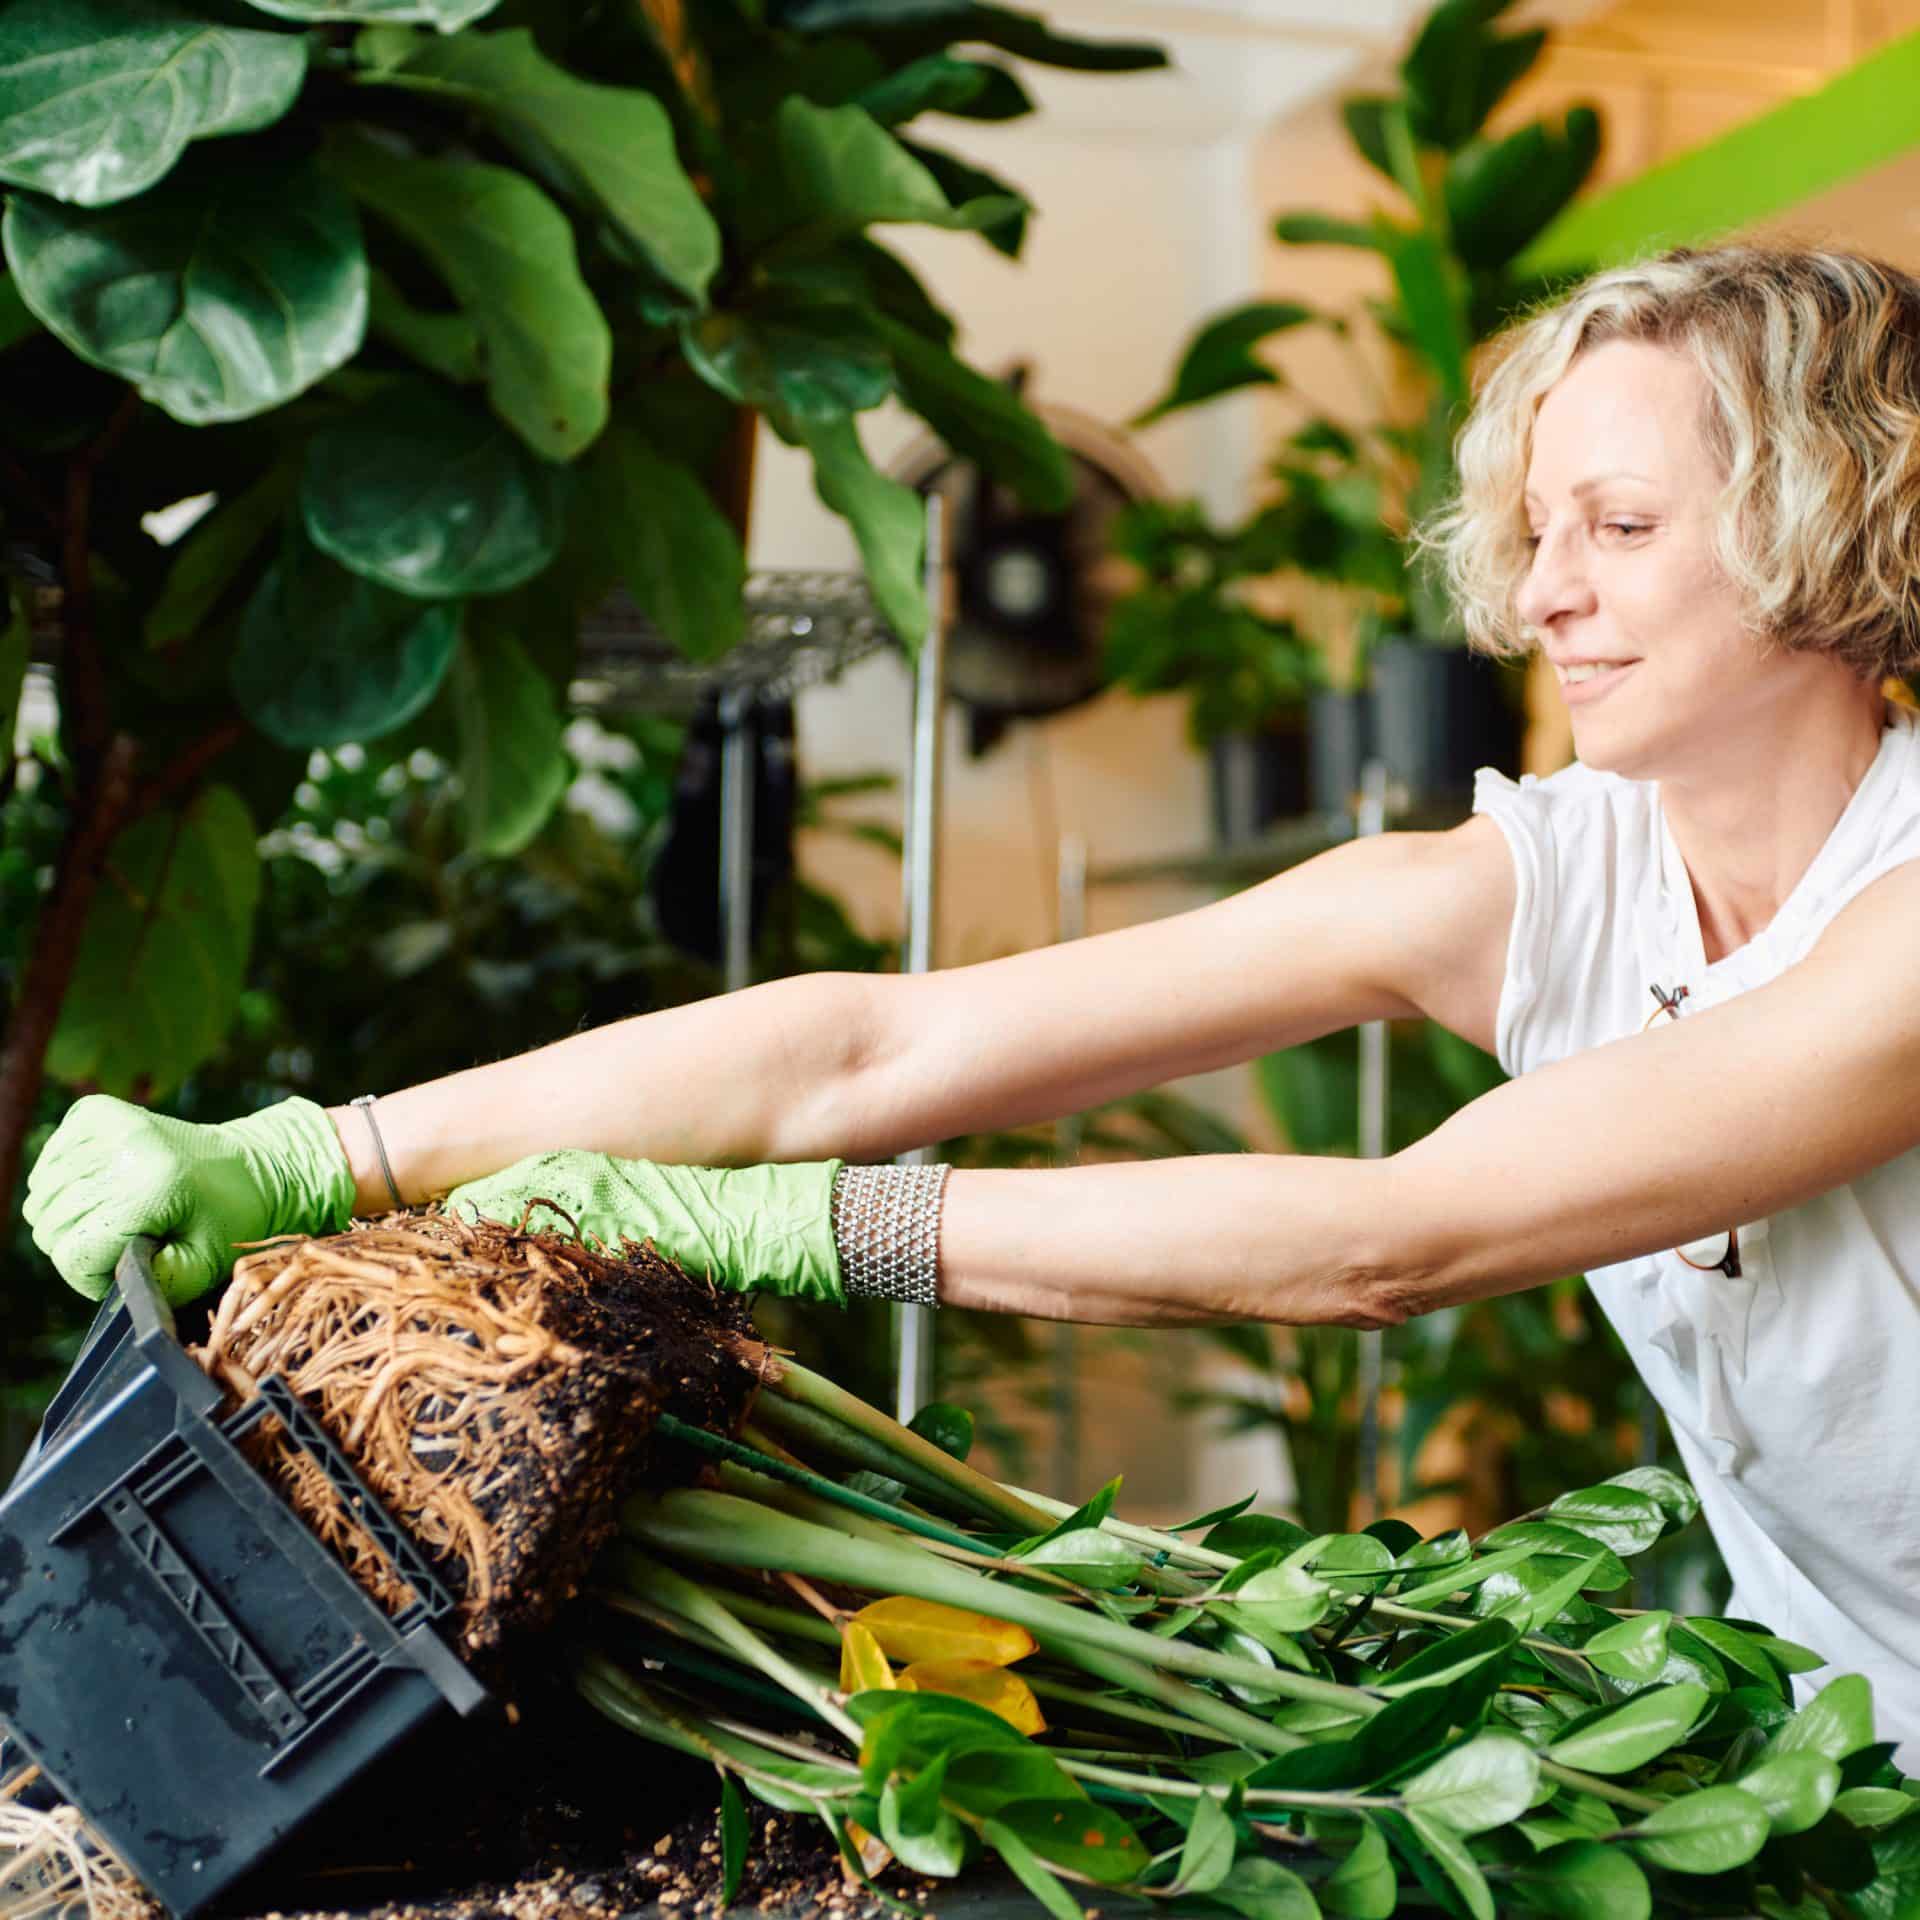 Juliette in a casual white top and wearing green gardening gloves is carefully removing a ZZ plant from its pot. She is focused on the task, surrounded by lush greenery in a well-lit indoor garden area. The roots and soil are visible as she holds the plant, emphasizing the repotting process.